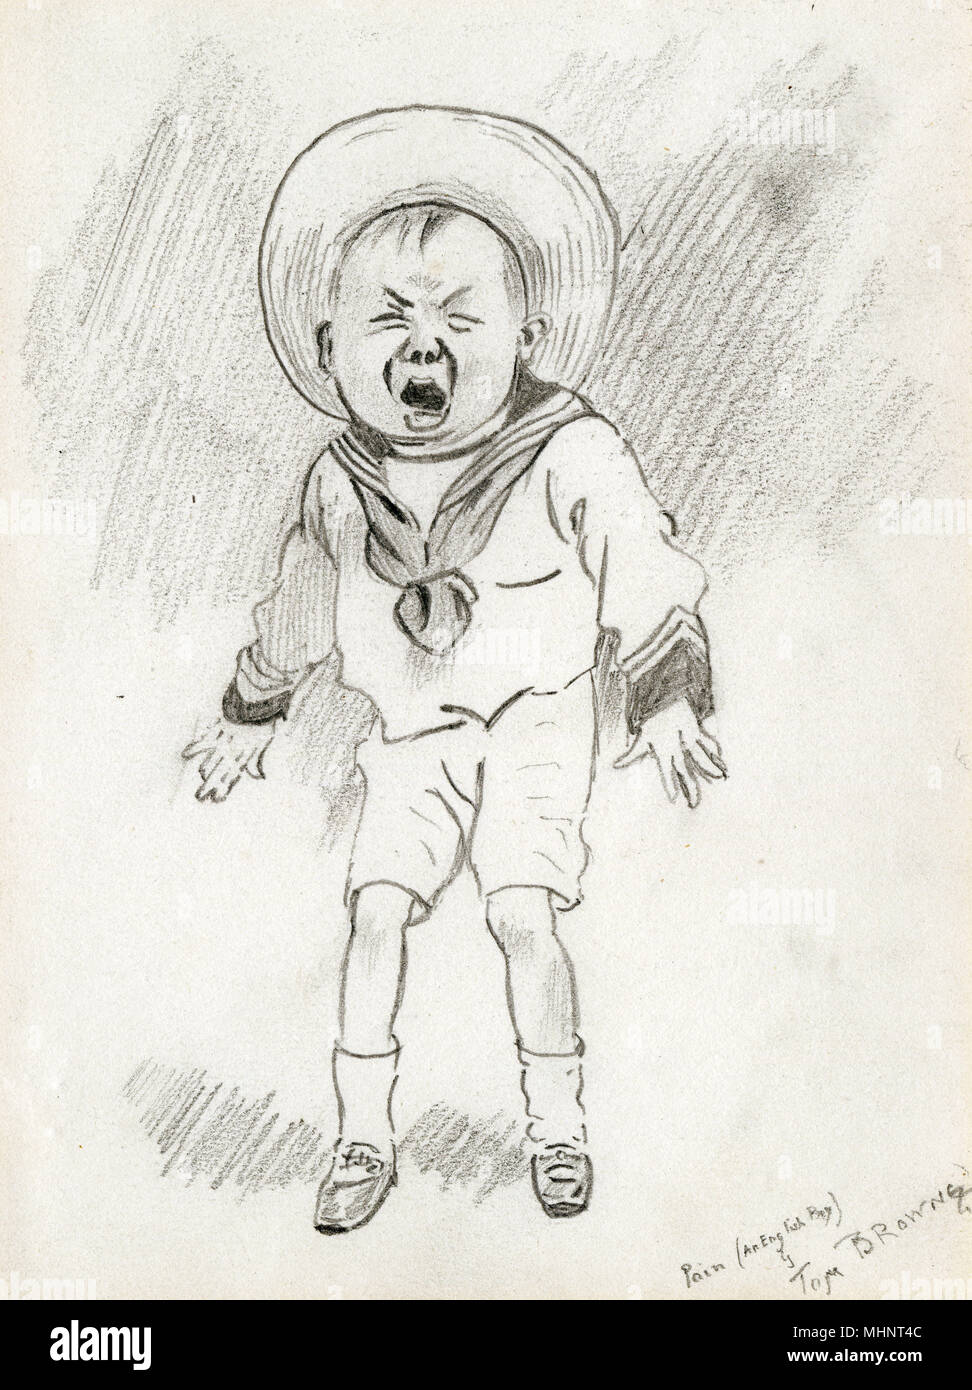 Preparatory pencil sketch by the extremely popular English strip cartoonist, painter and illustrator of the late Victorian and Edwardian period, Tom Browne (1870-1910) entitled: 'Pain' - a boy screaming after some mishap...     Date: circa 1900 Stock Photo